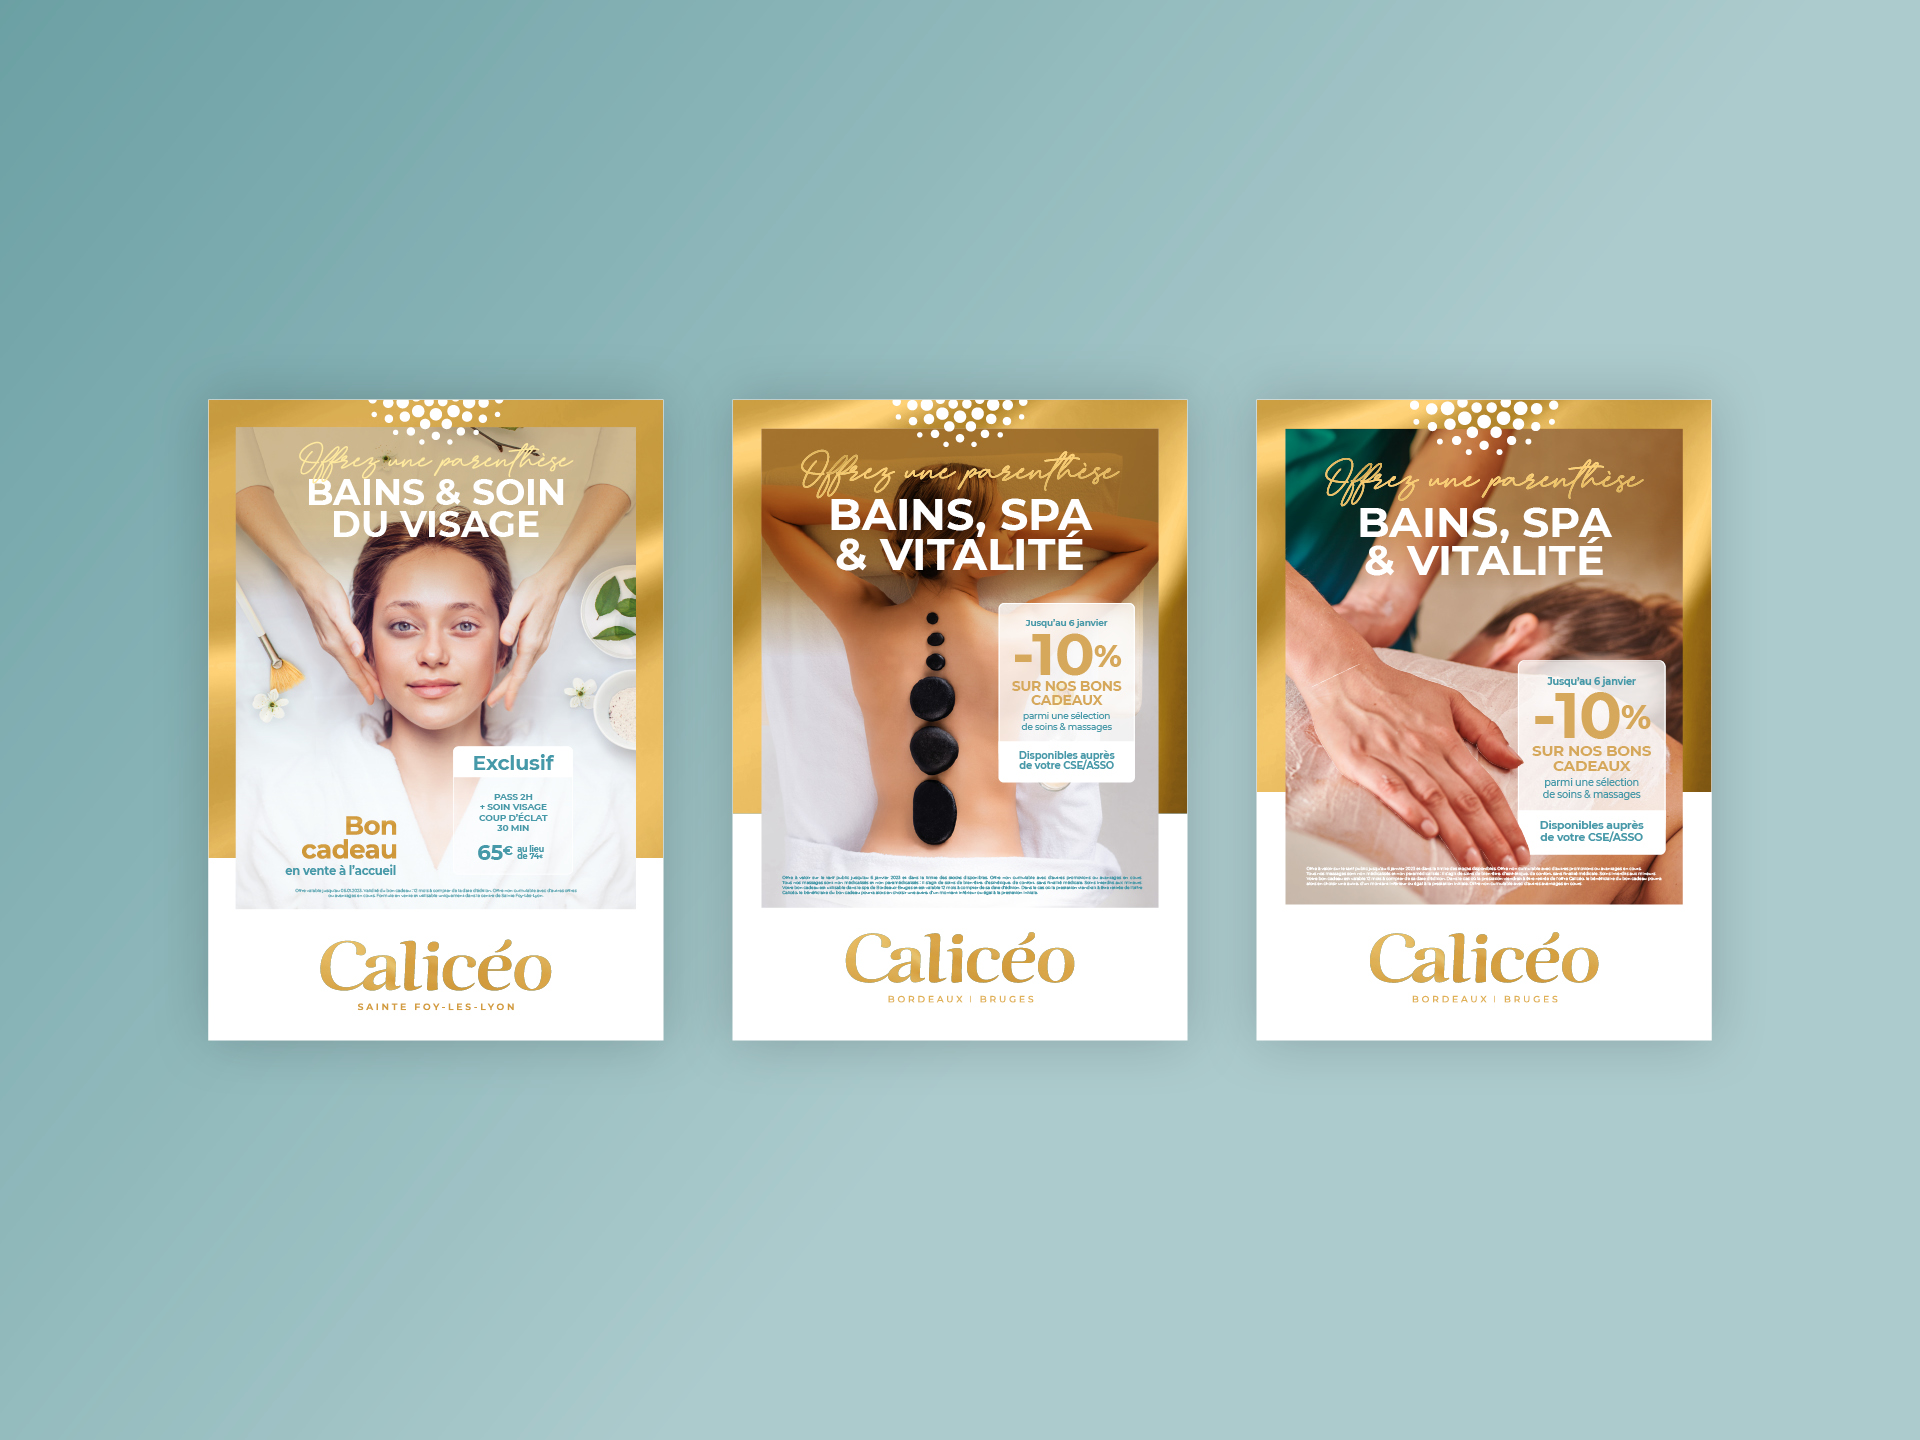 Campagne communication Caliceo